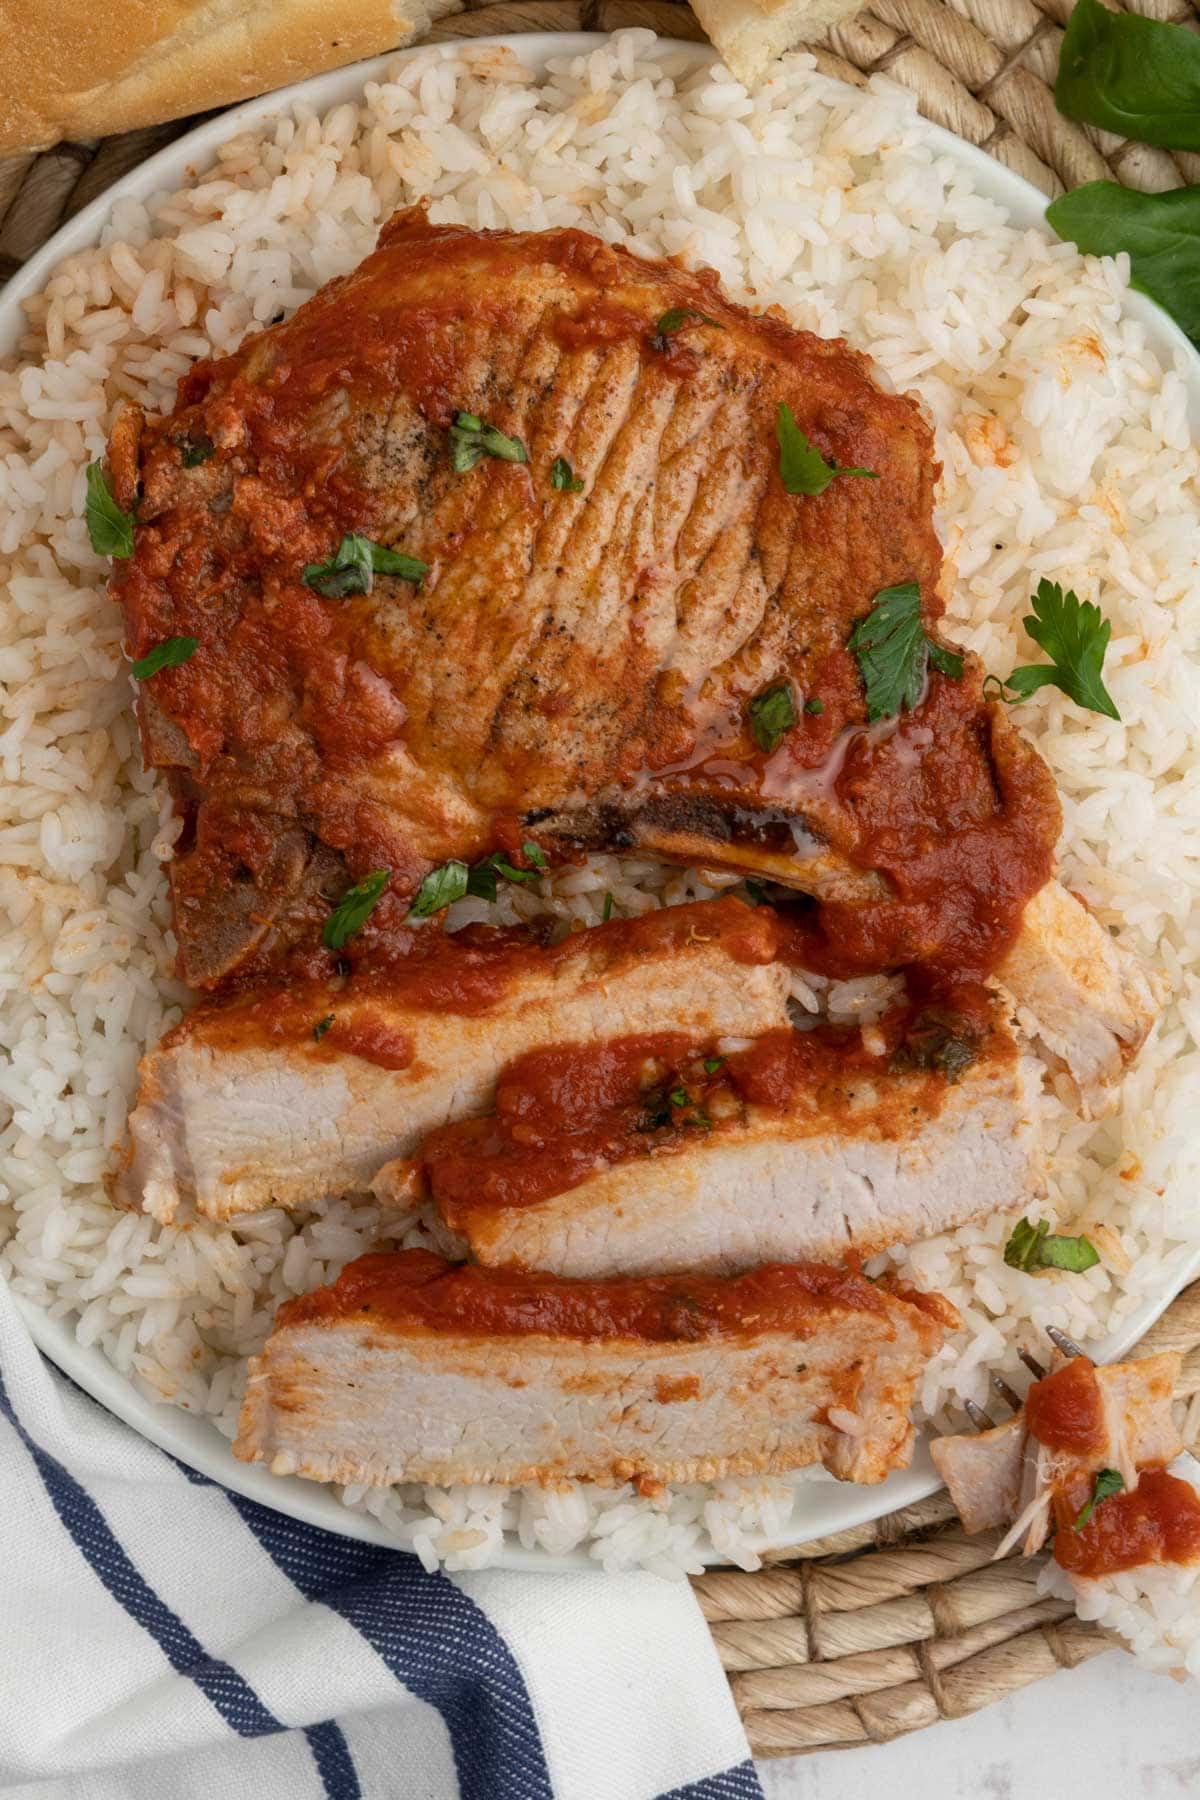 Pork chop with tomato sauce, served over white rice on a white plate.